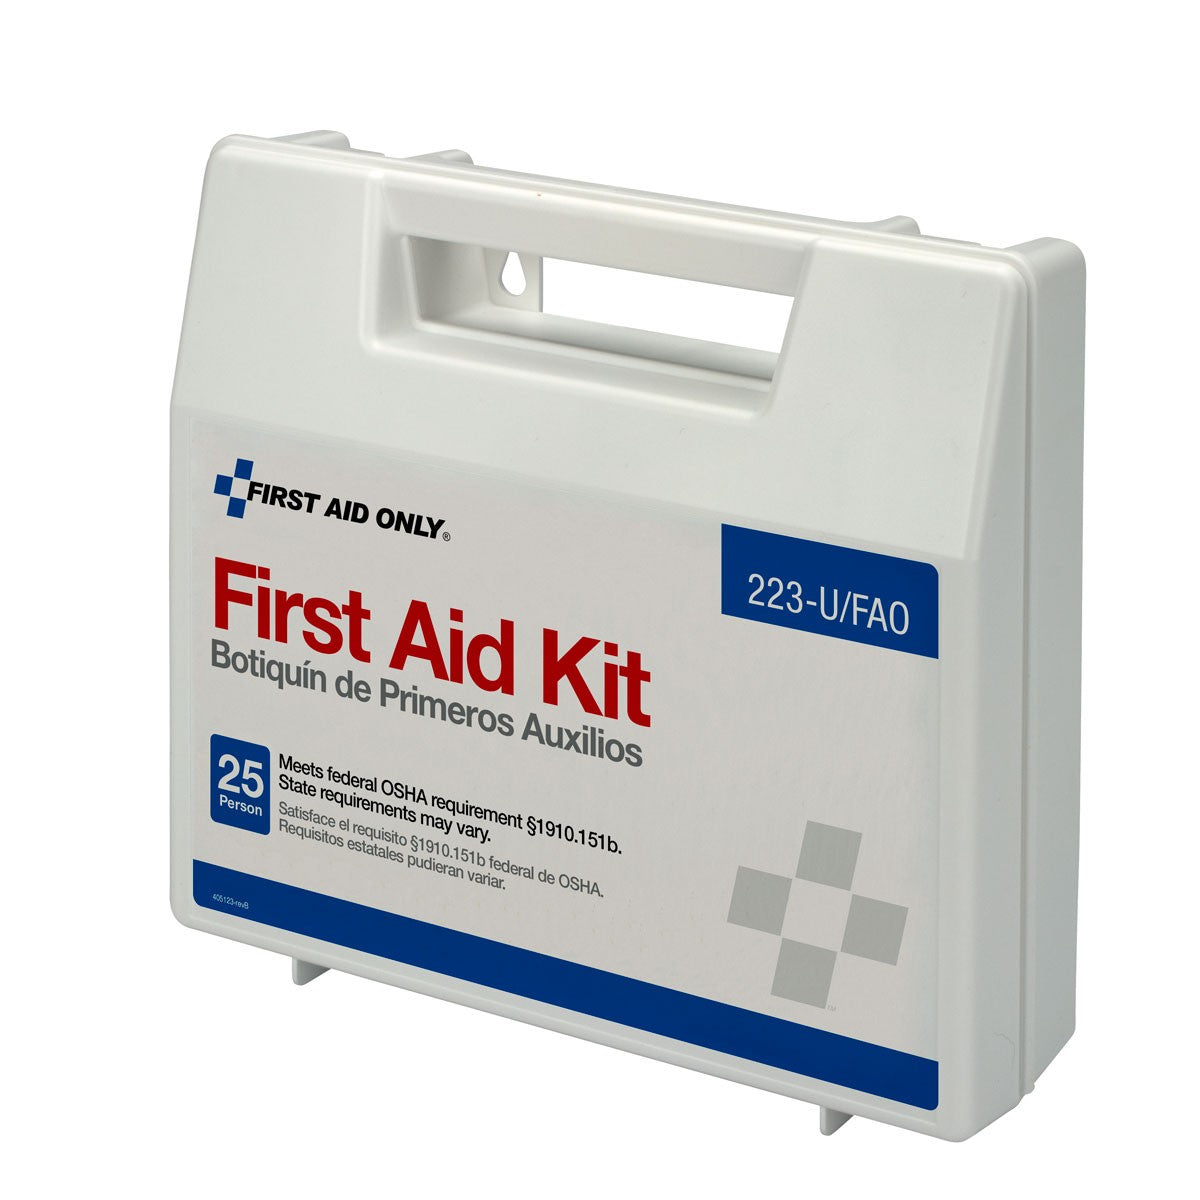 25 Person First Aid Kit, Plastic Case With Dividers - W-223-U/FAO